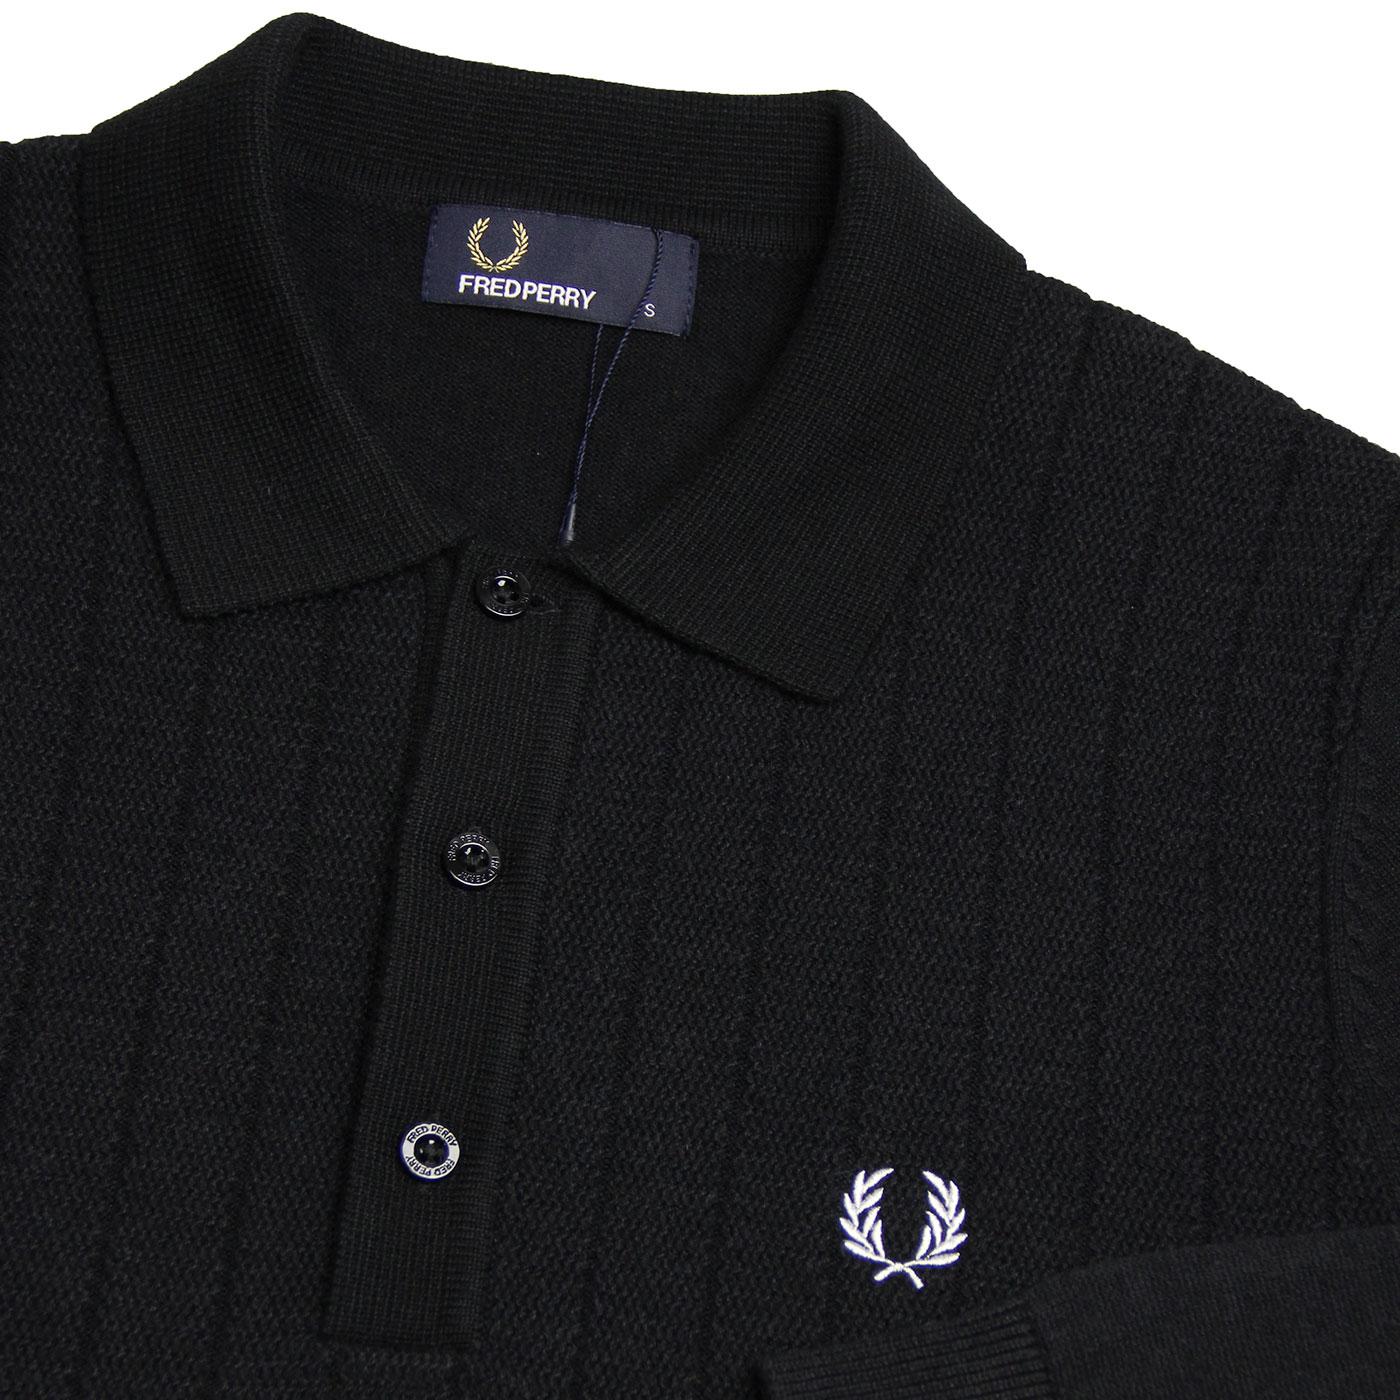 FRED PERRY Retro 60s Mod Ribbed Knit Polo Shirt Black Marl